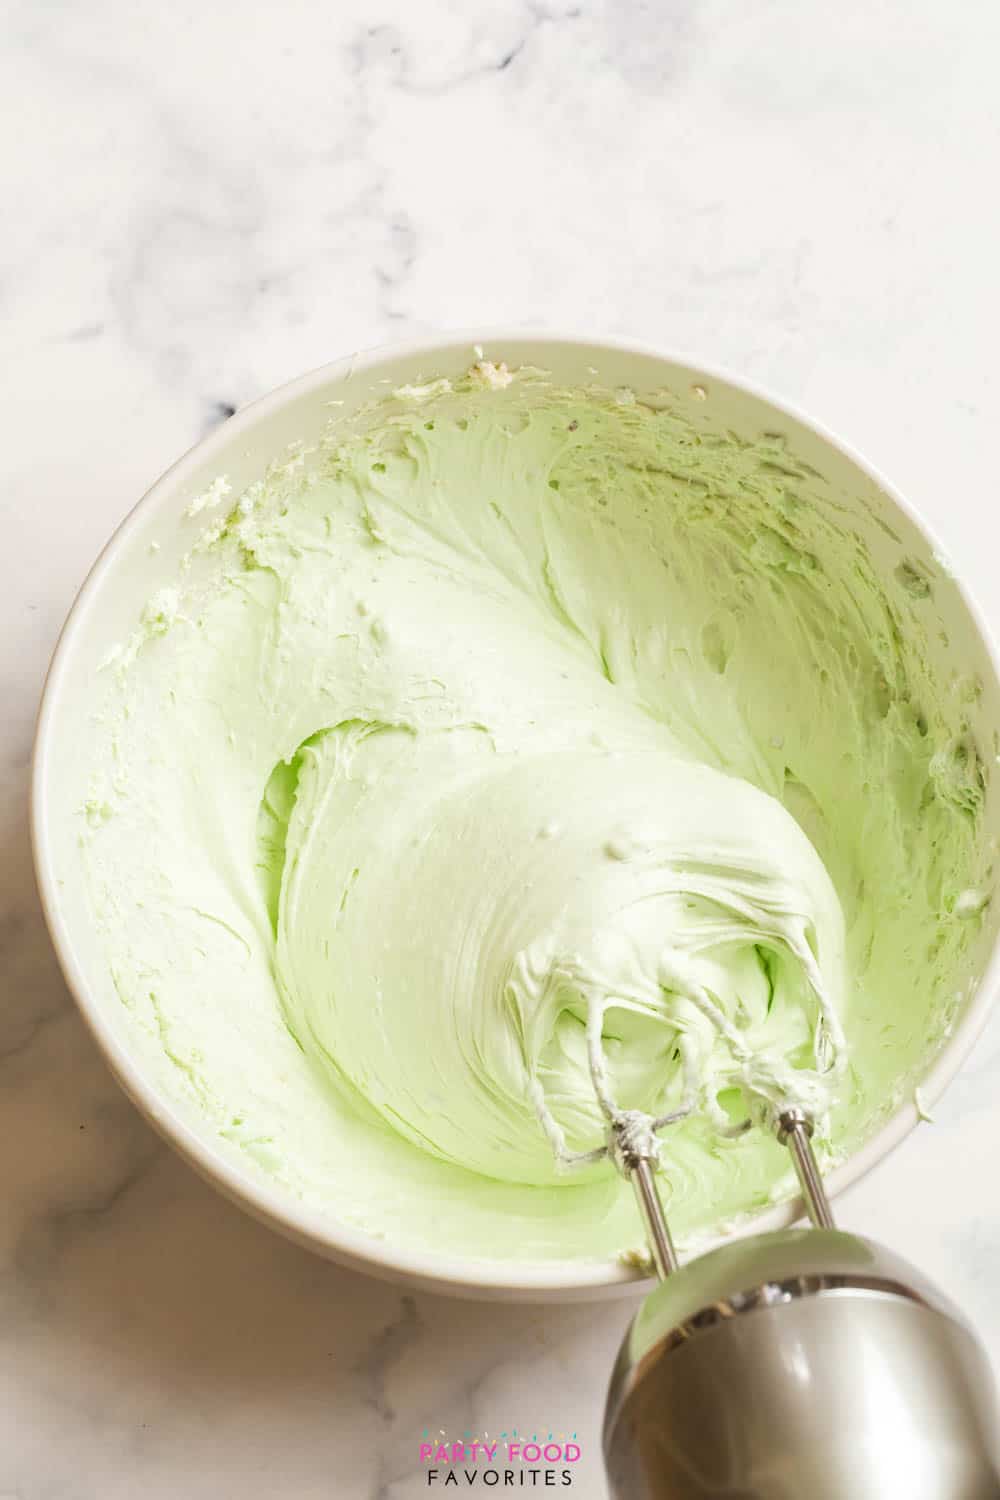 beating cream cheese with cool whip and pistachio instant pudding